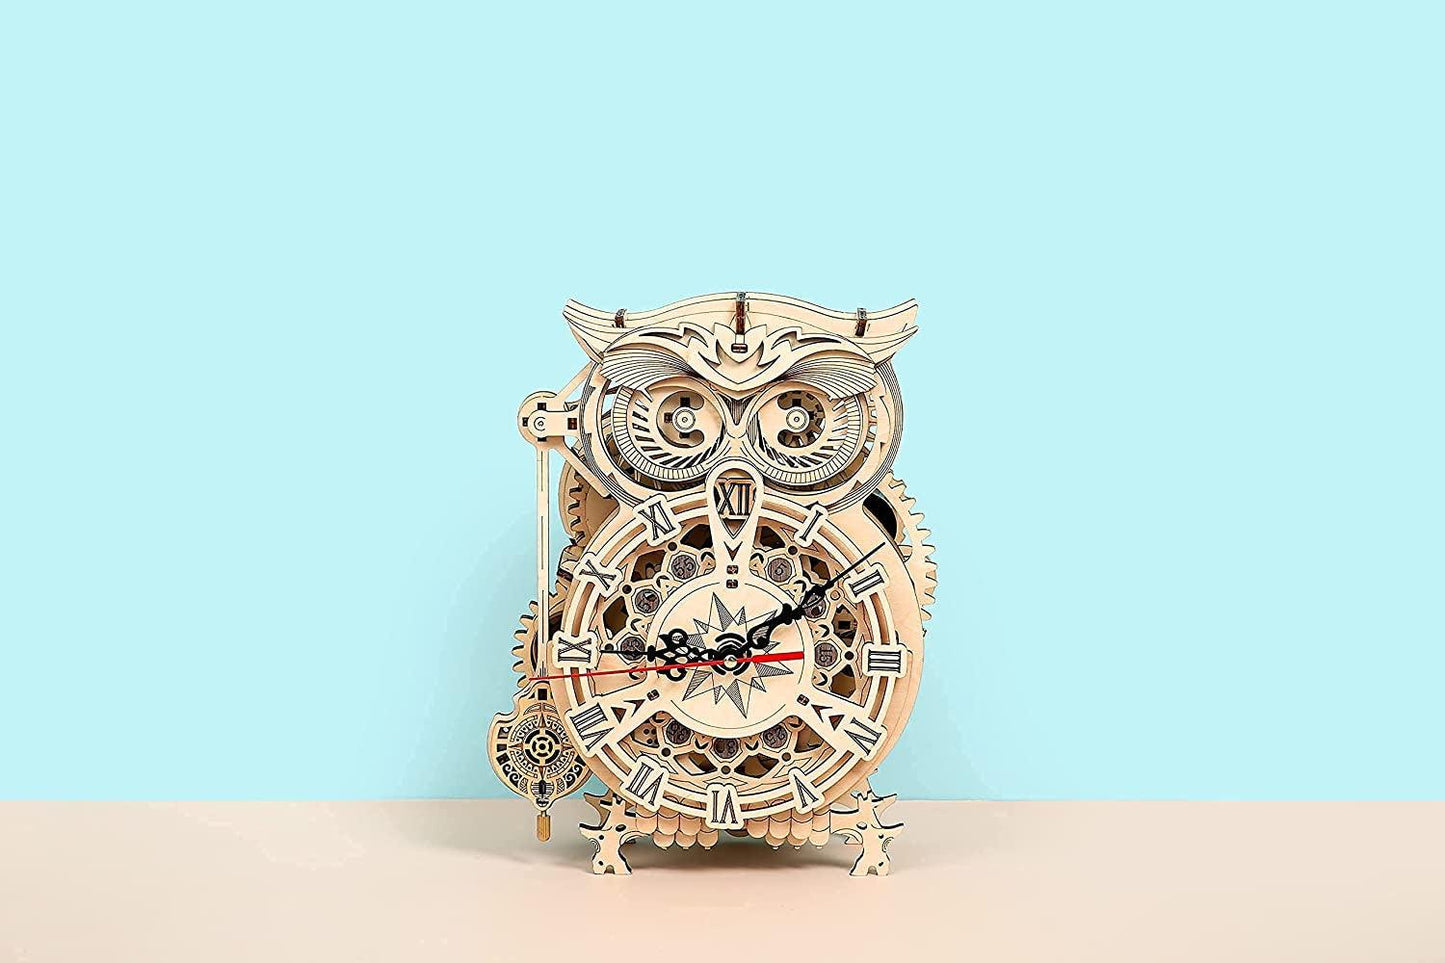 Owl Clock - 3D Puzzle, Wooden Toys, Craft Kits, DIY Model Gift for Adults; Brain Teaser Puzzles STEM Building - WoodArtSupply